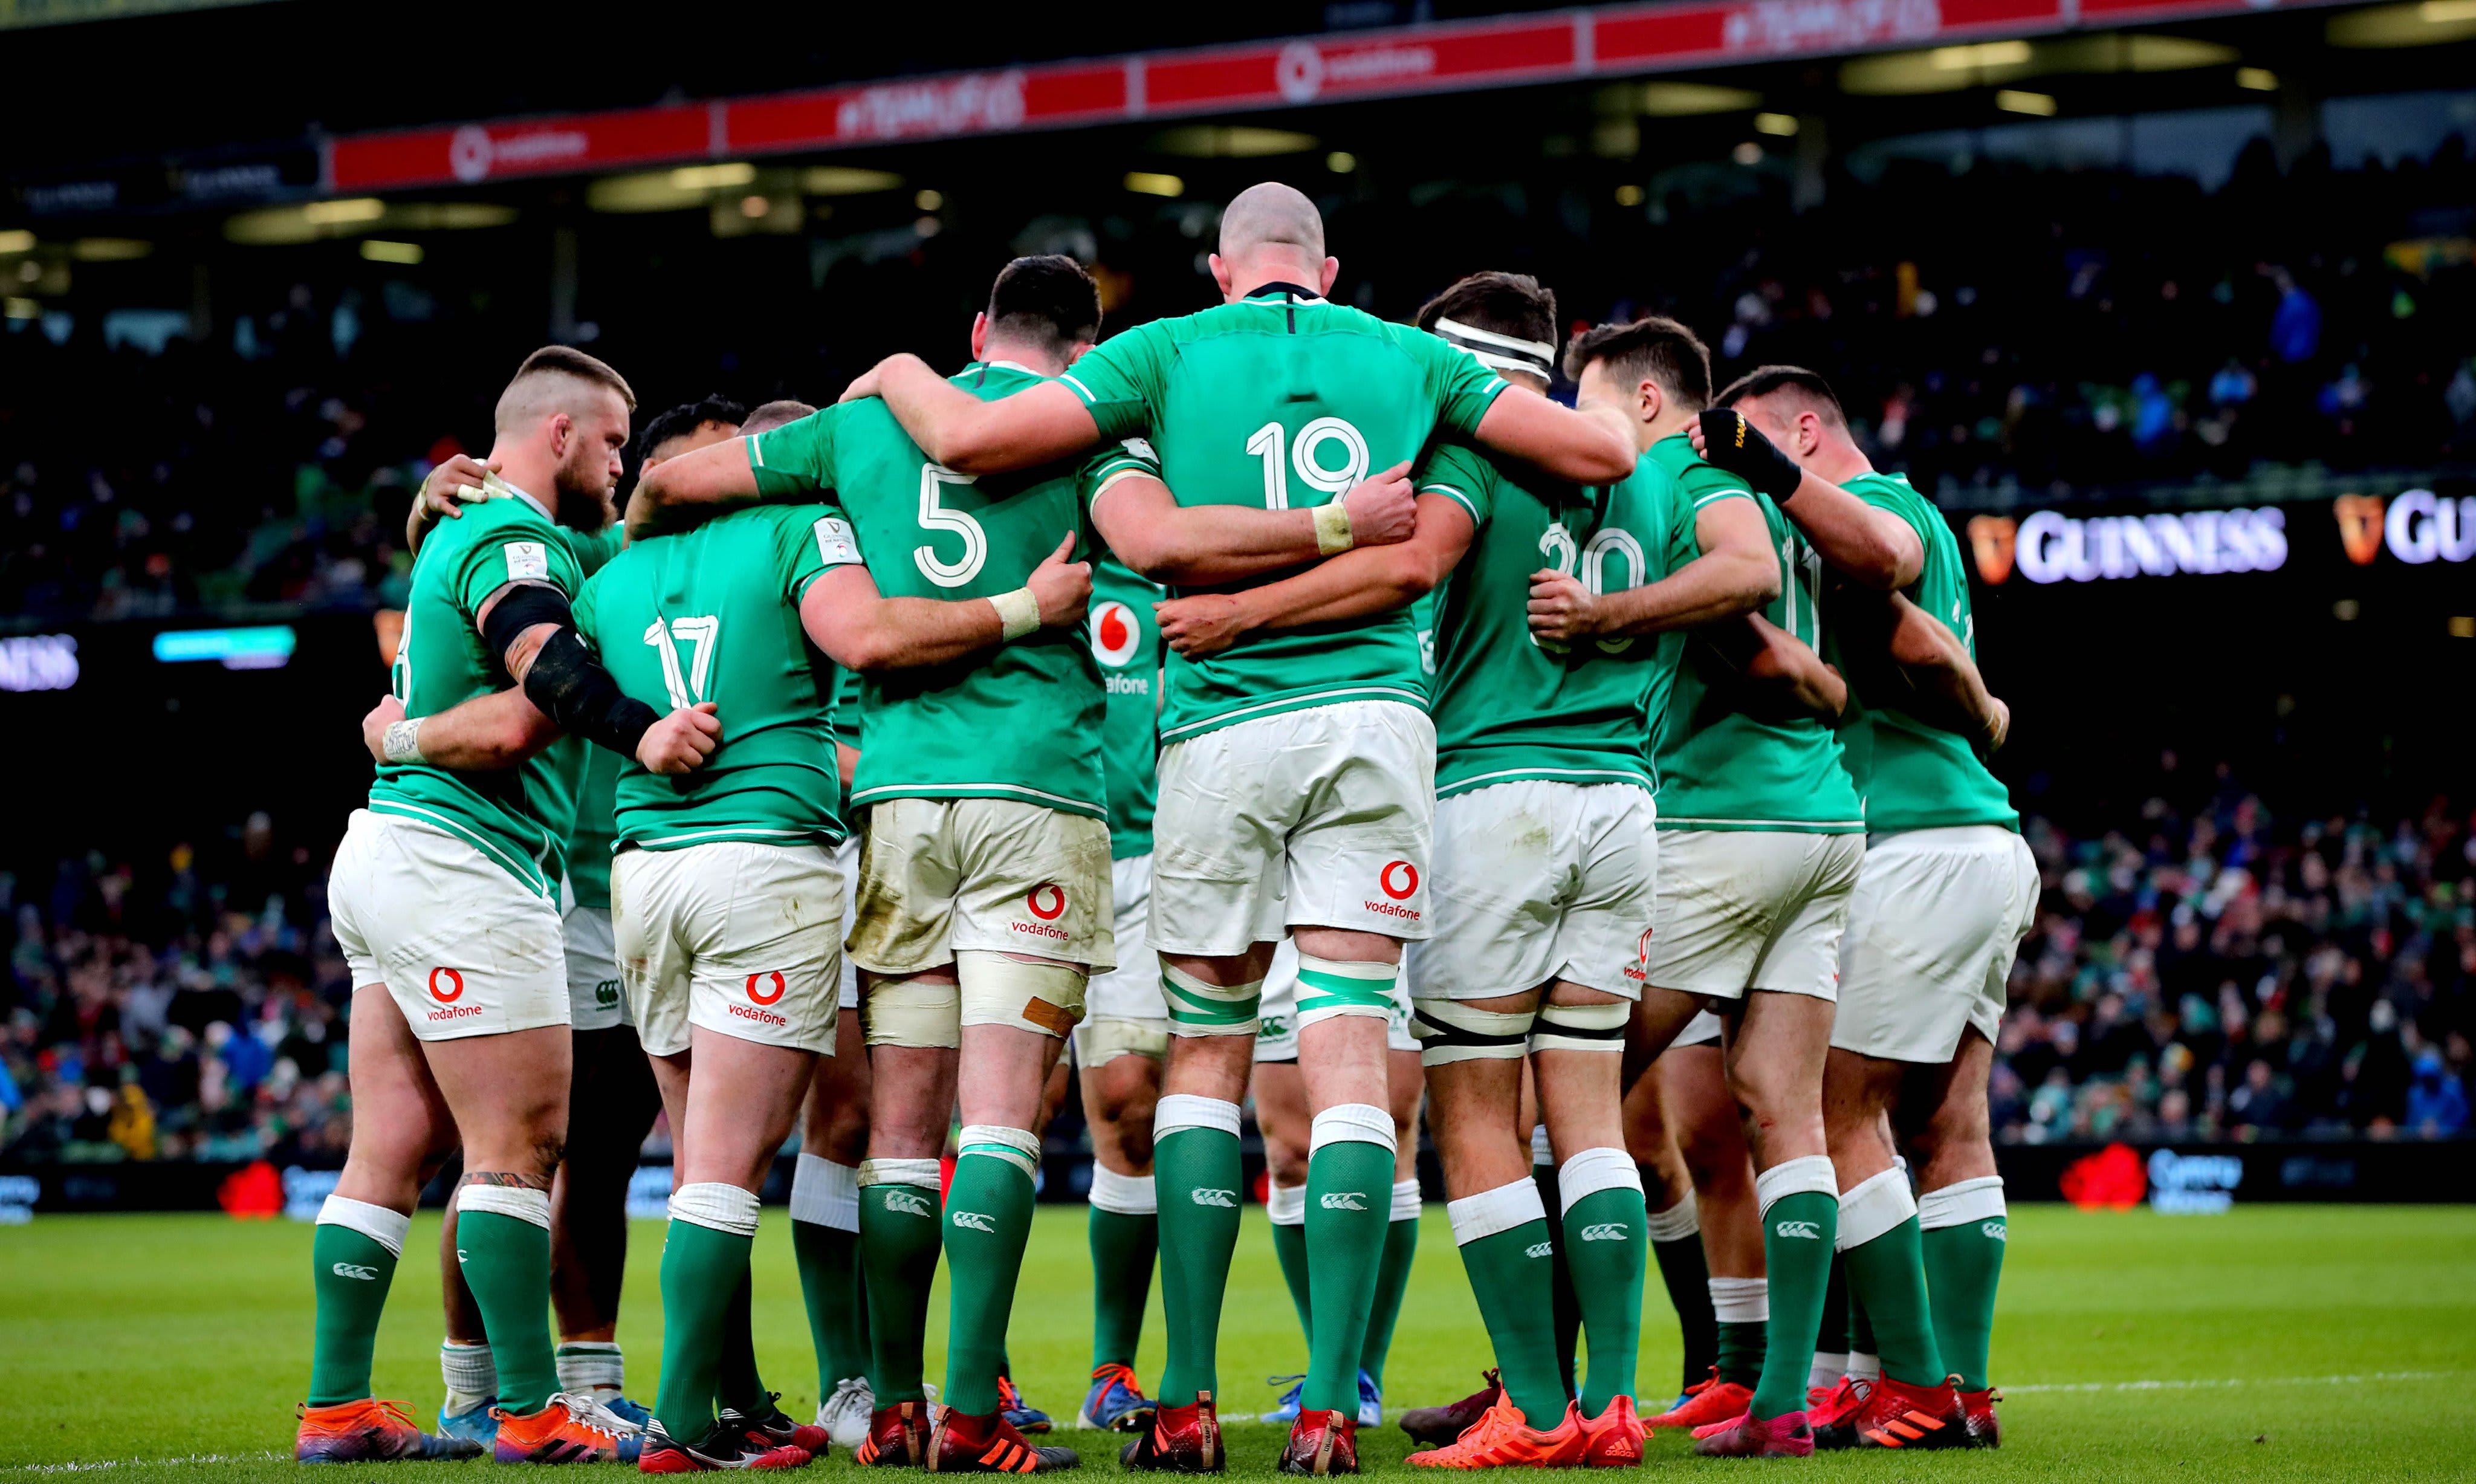 Ireland rugby team huddled in a group chat on the pitch